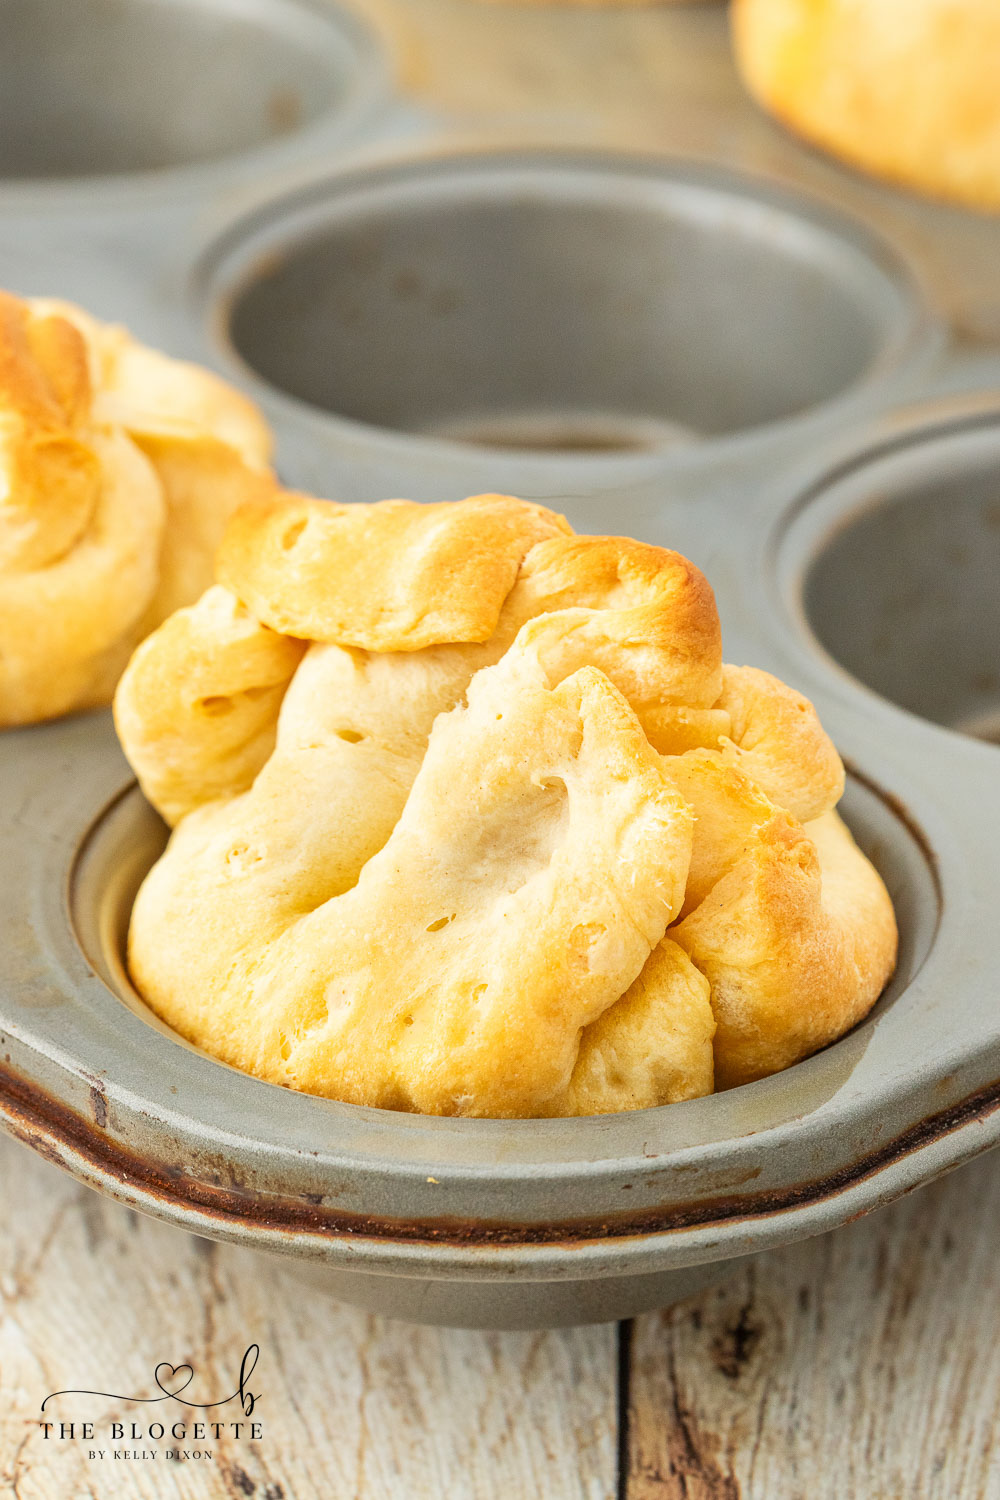 Buttery biscuit filled with chili cheese!